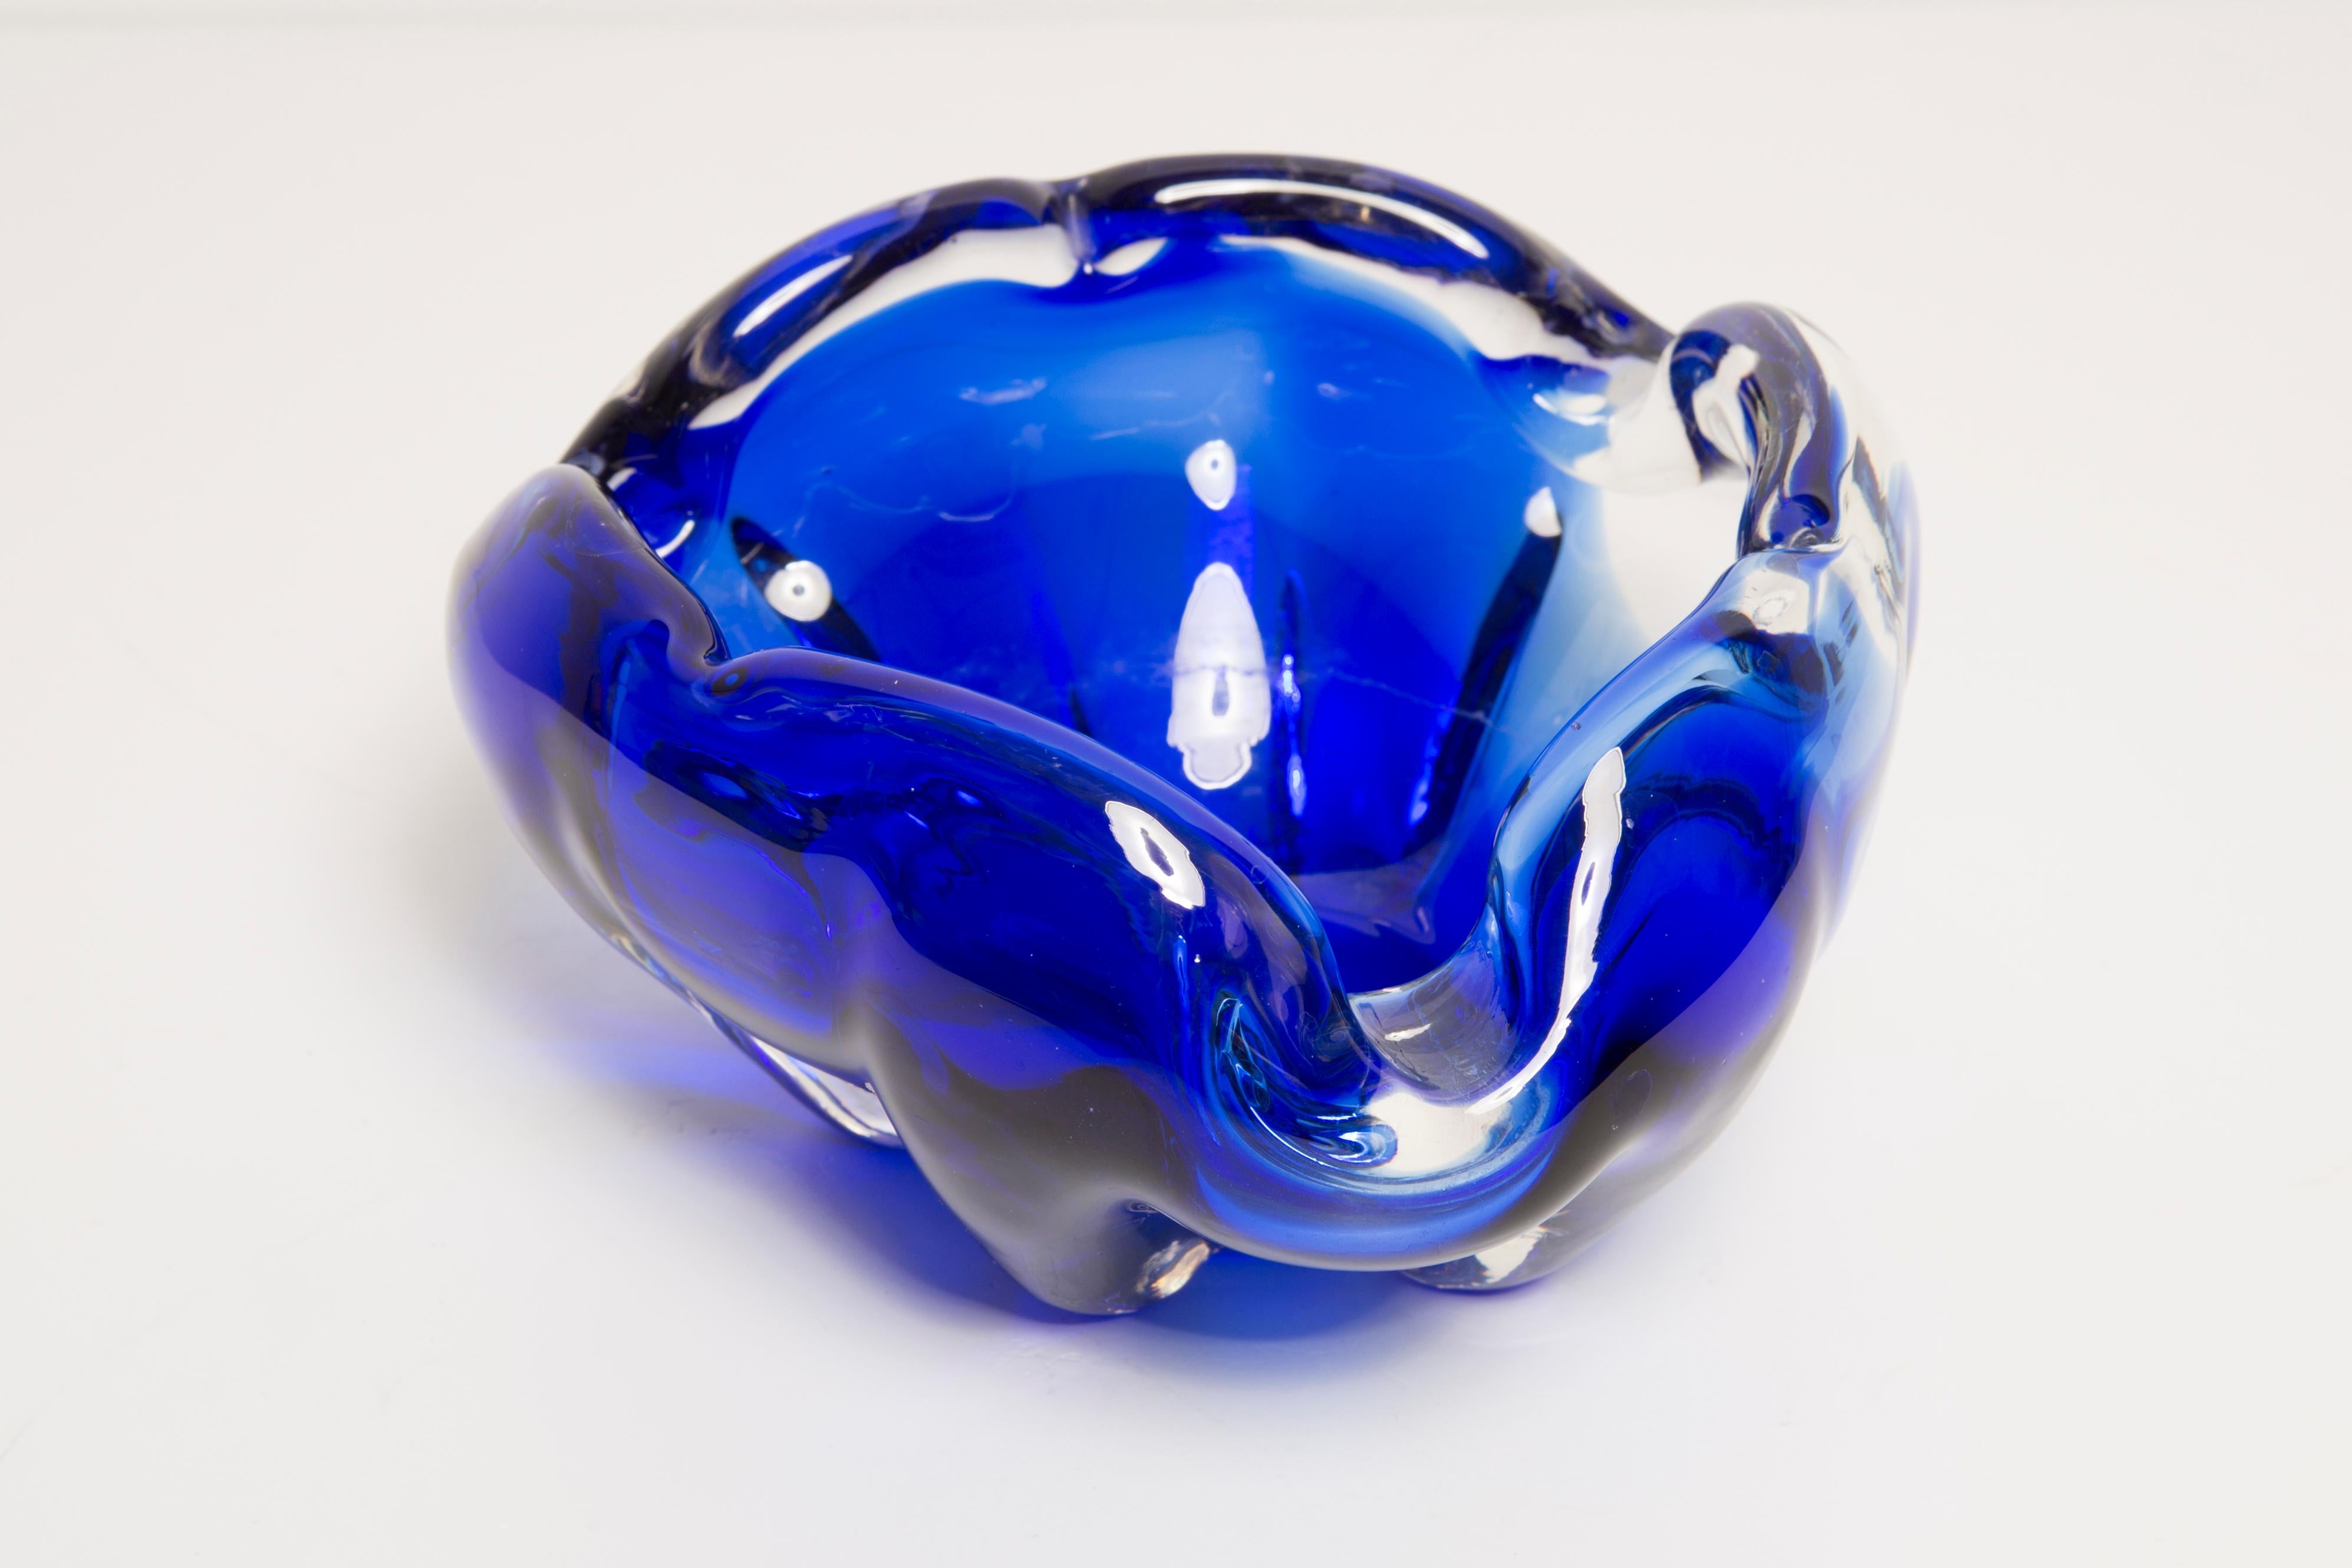 This original vintage glass ash tray bowl element was designed and produced in the 1970s in Lombardia, Italy. It is made in Sommerso Technique and has a fantastic faceted form. The vibrant color makes this items highly decorative. This item is a